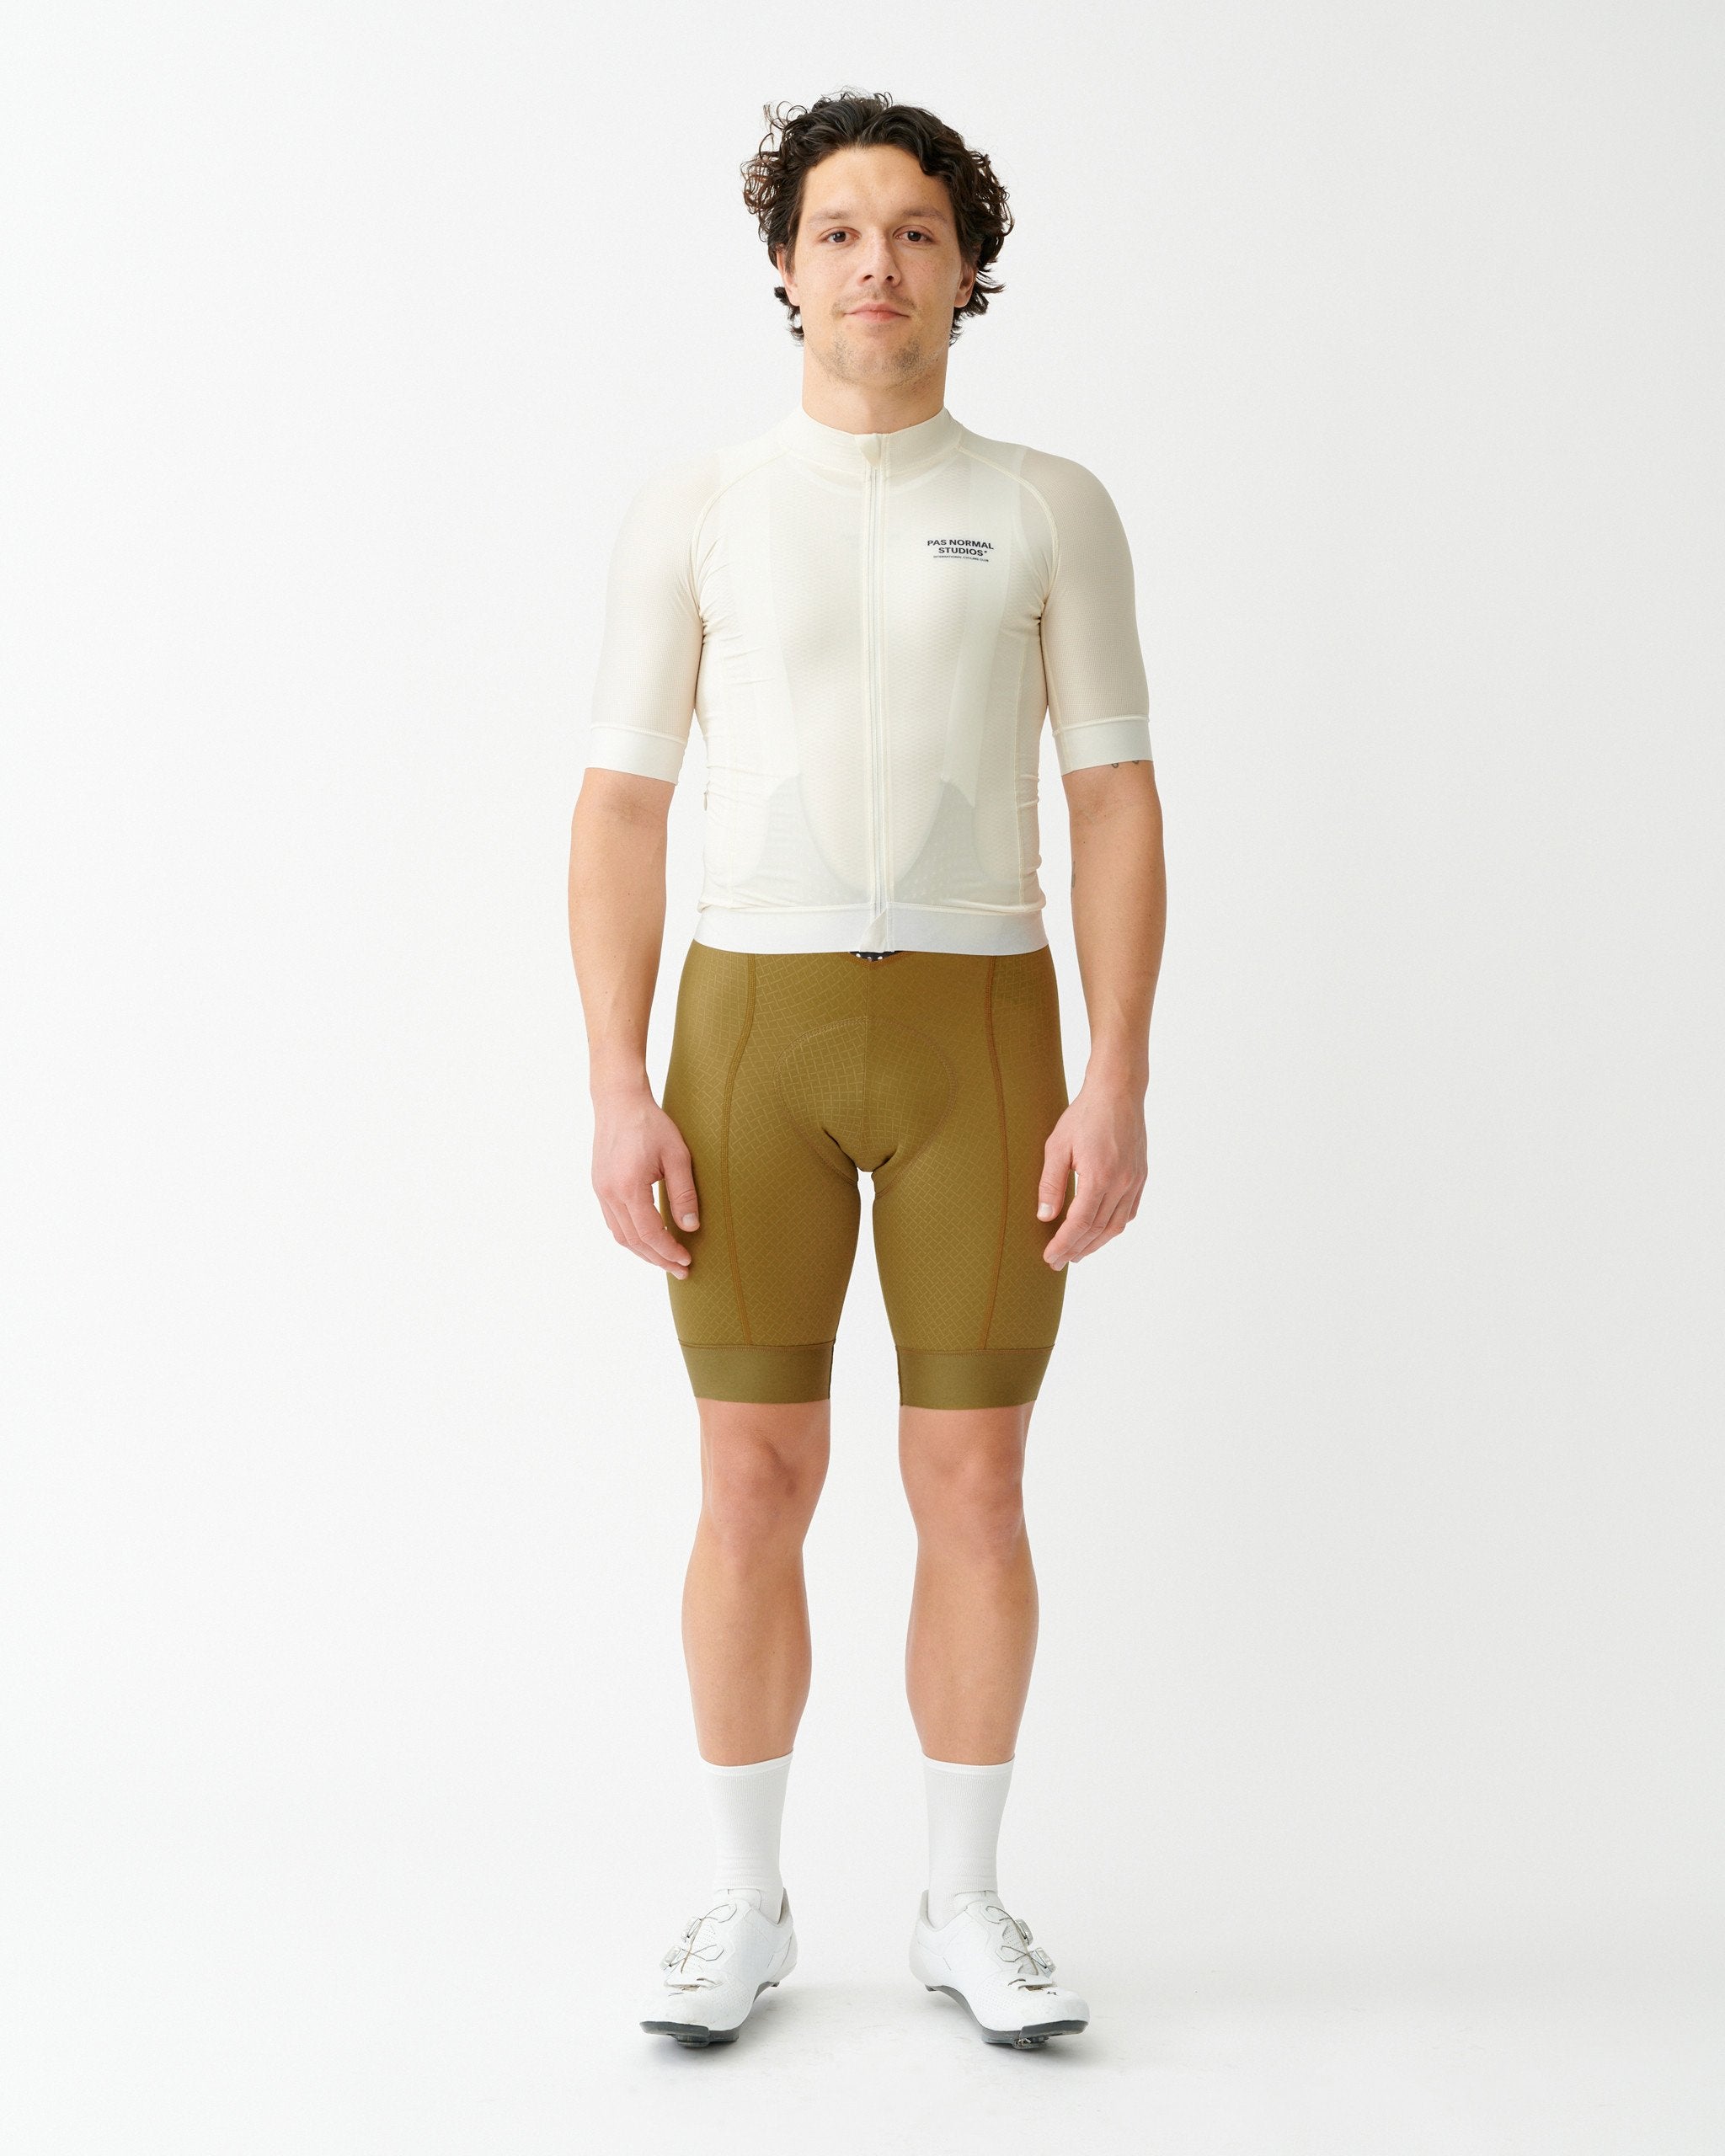 Mechanism Late Drop Jersey - Off White